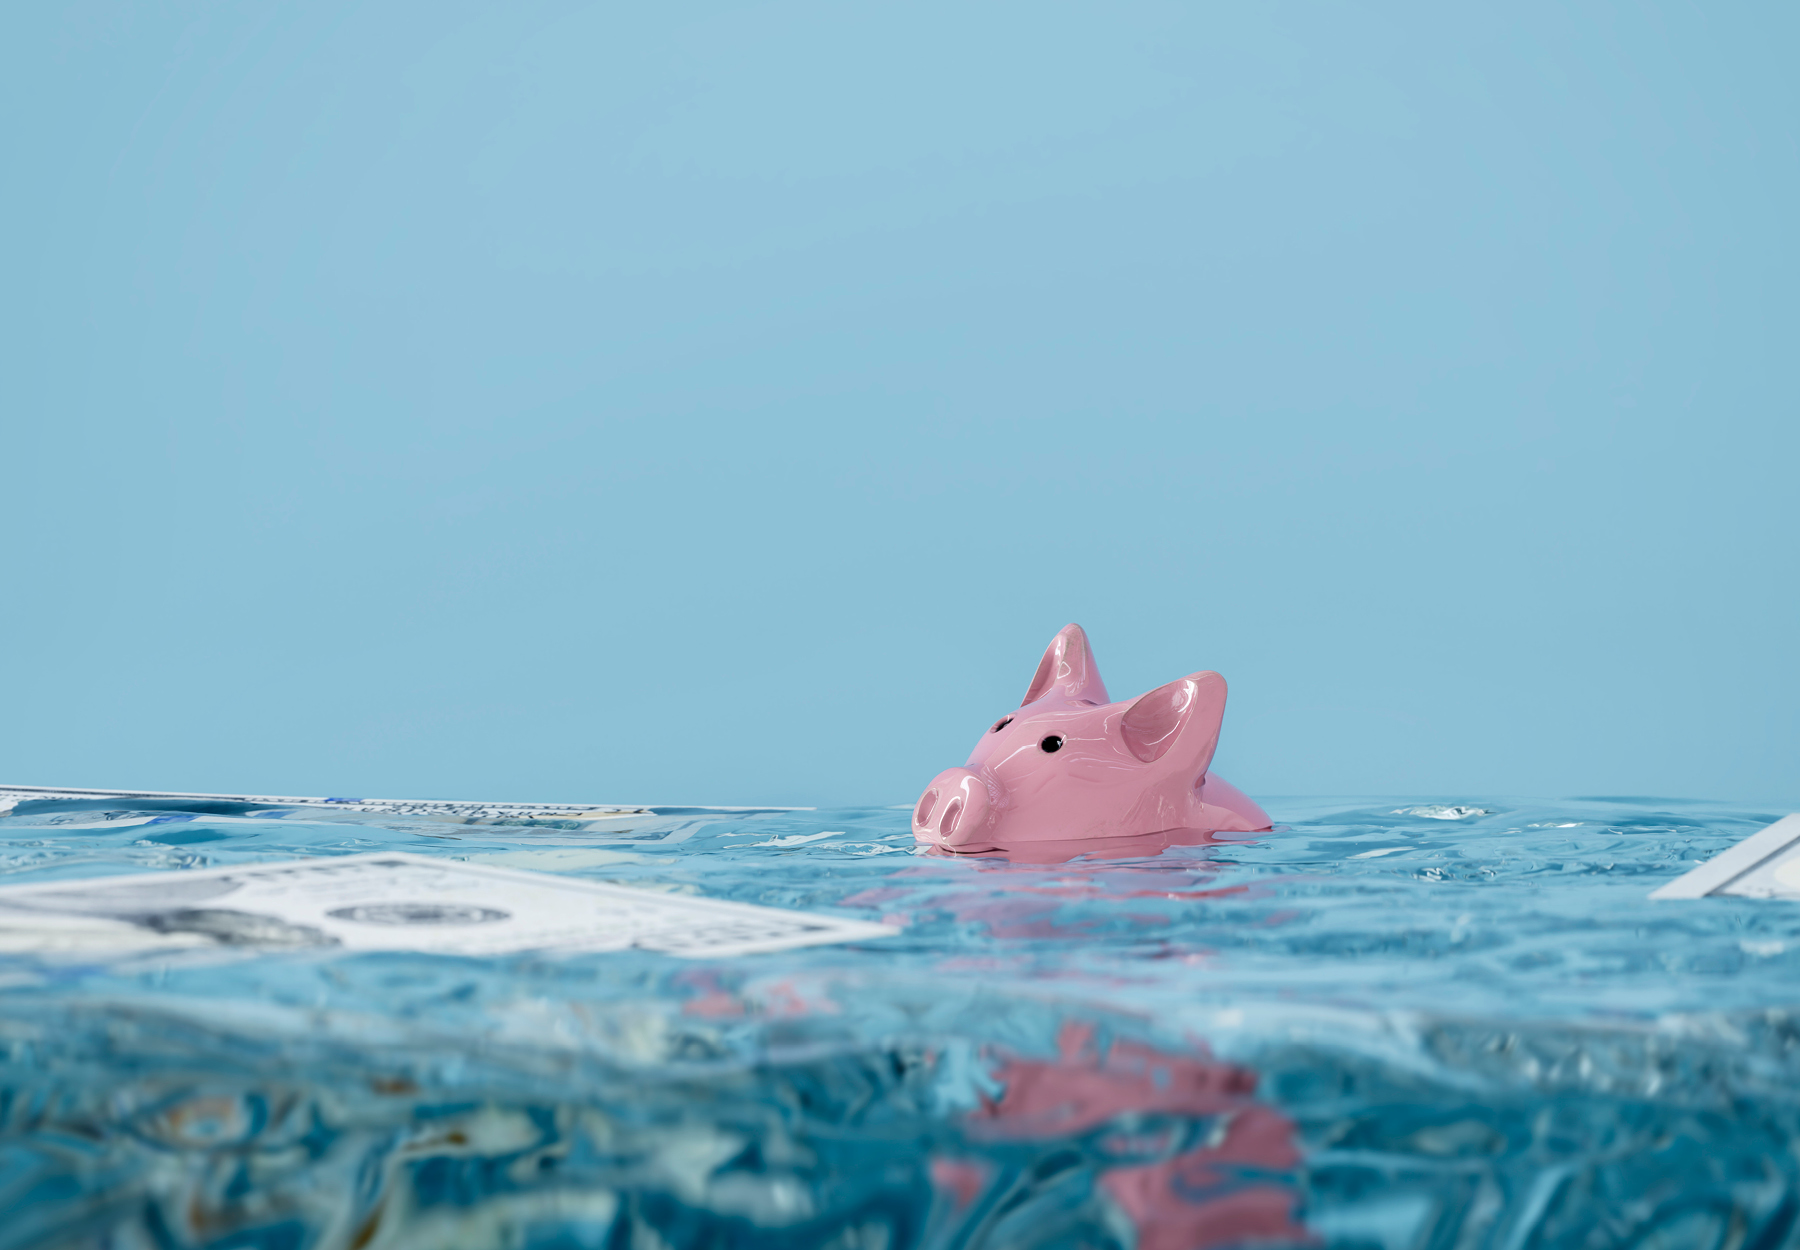 illustration of piggy bank floating in water surrounded by paper money. Economic meltdown concept. Stock image.